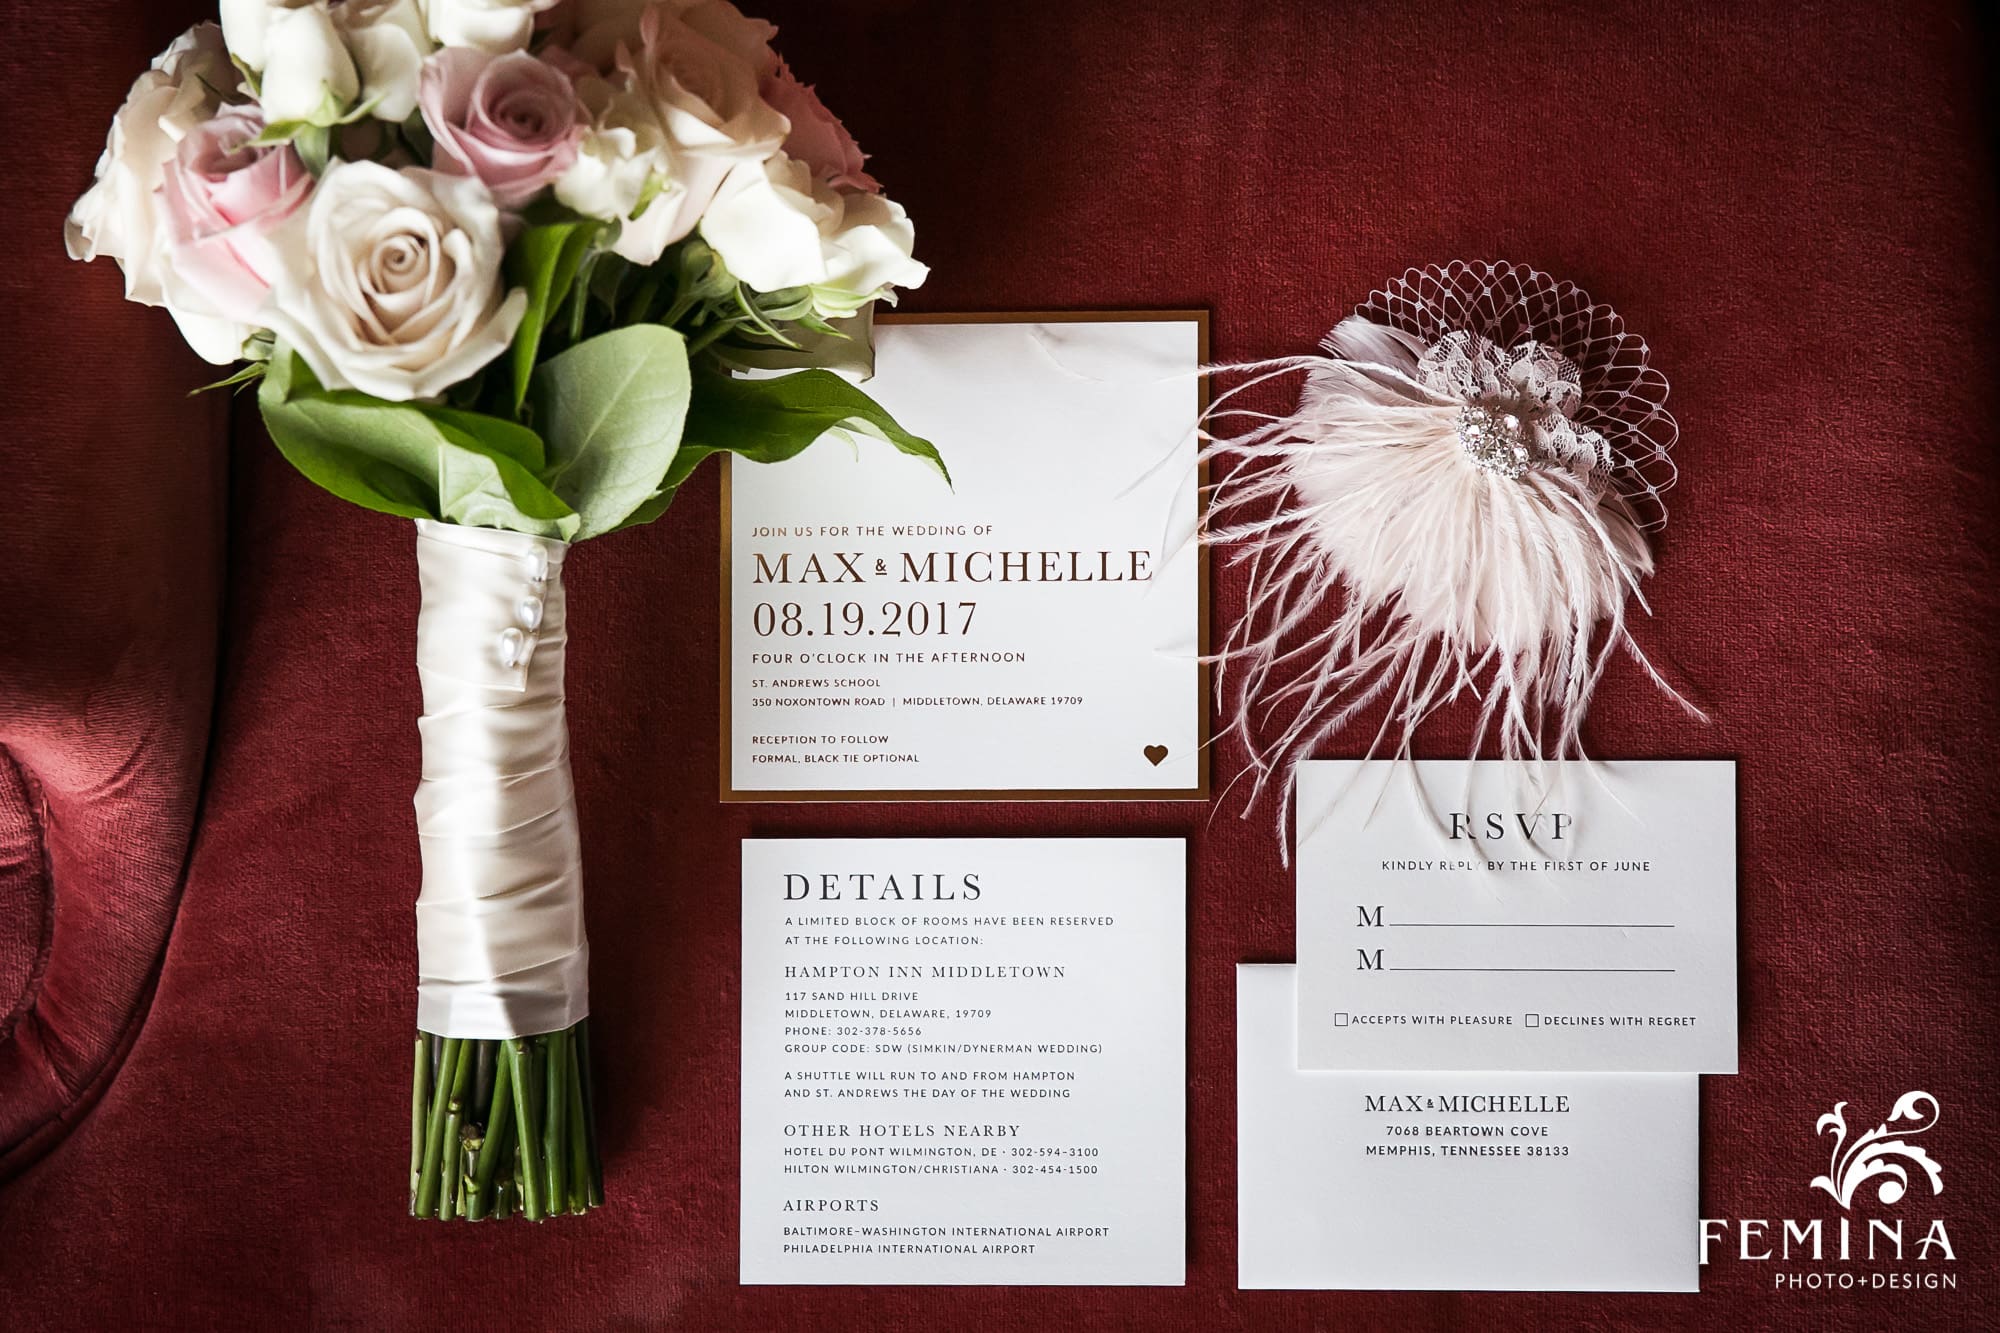 MIchelle and Max's stationary and wedding details 